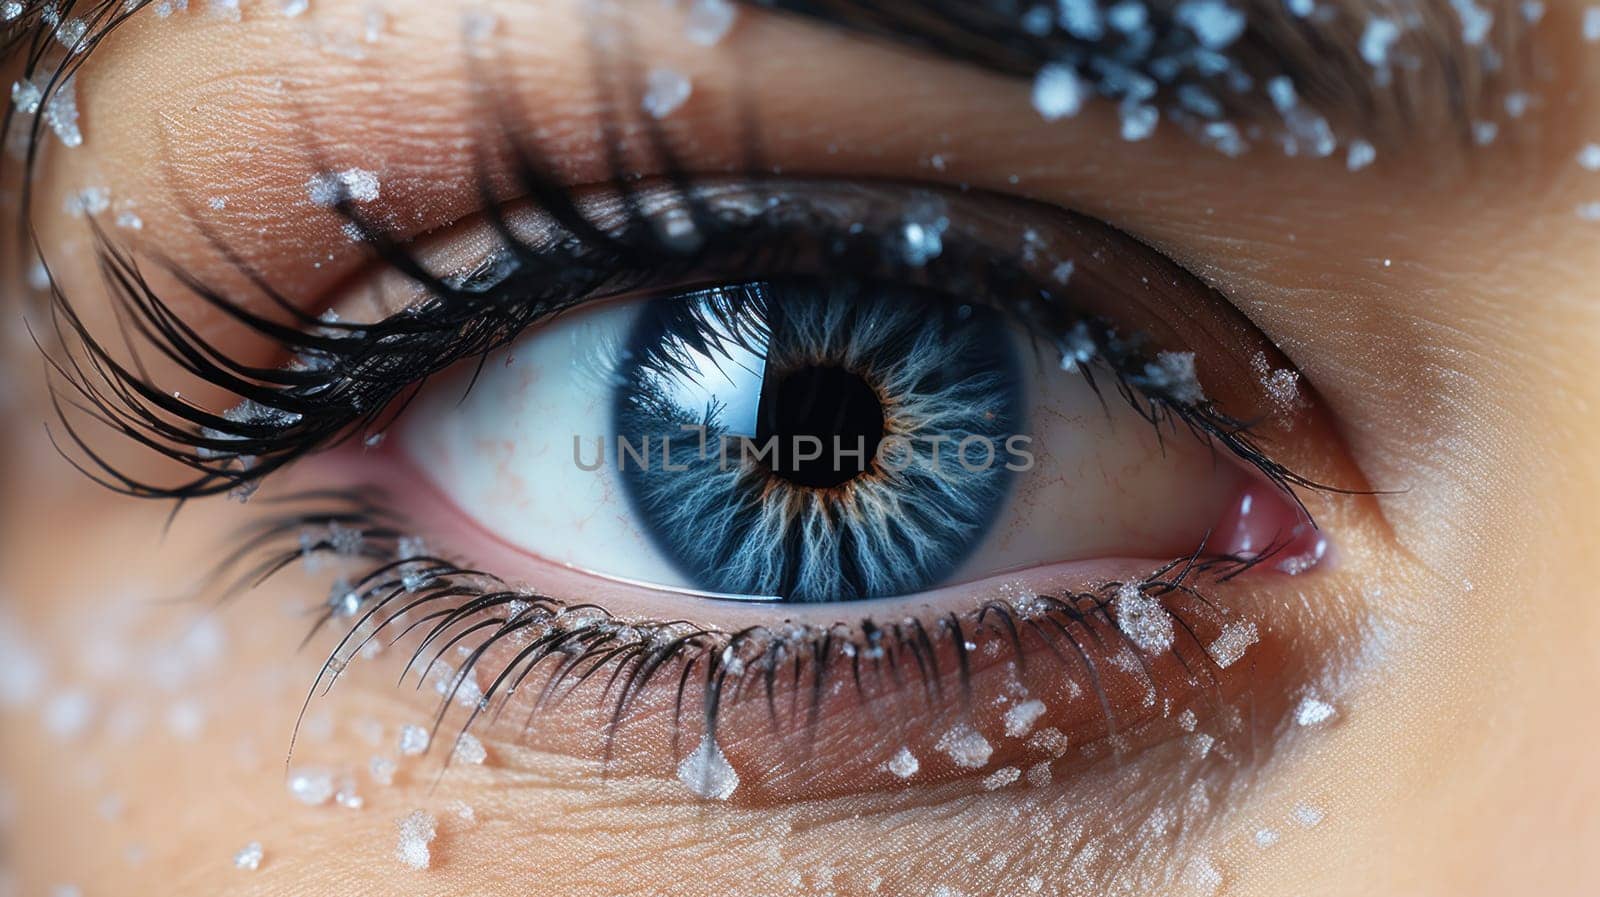 A close up of a woman's eye with snow on it